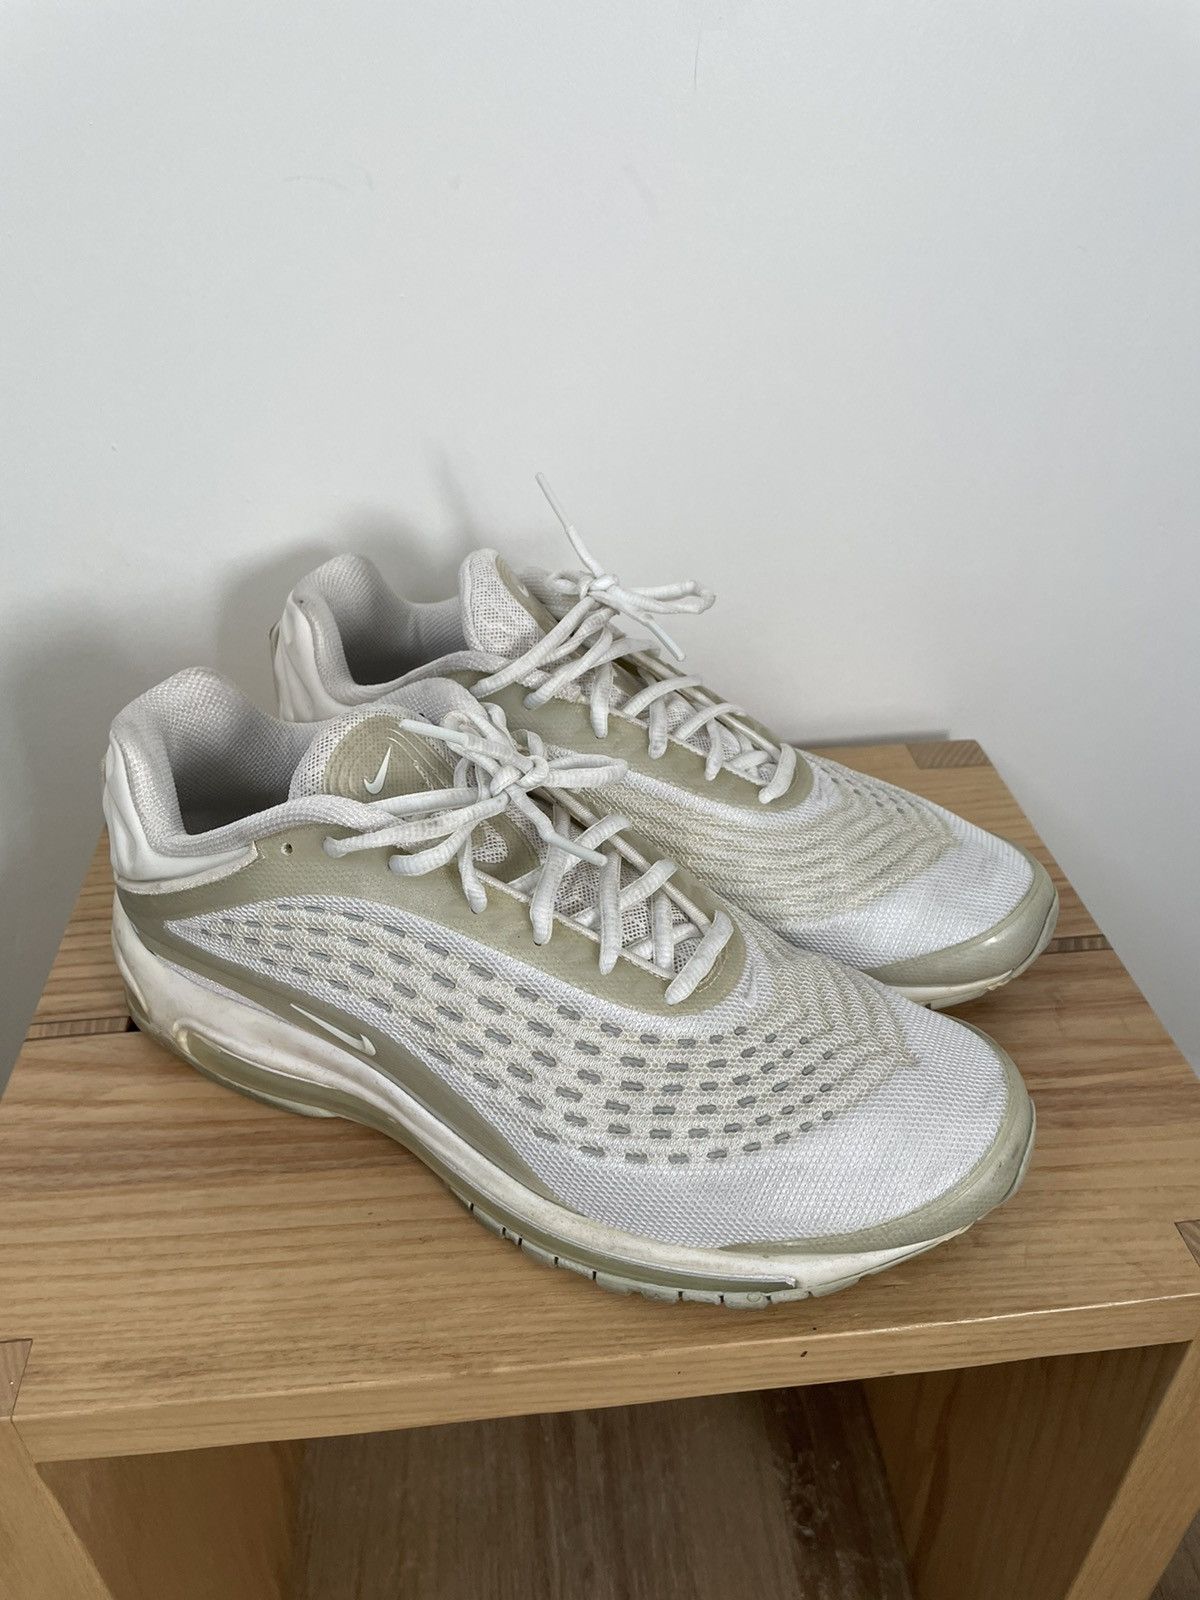 Nike Air Max Deluxe Pure Platinum 2018 Size US 10.5 / EU 43-44 - 1 Preview